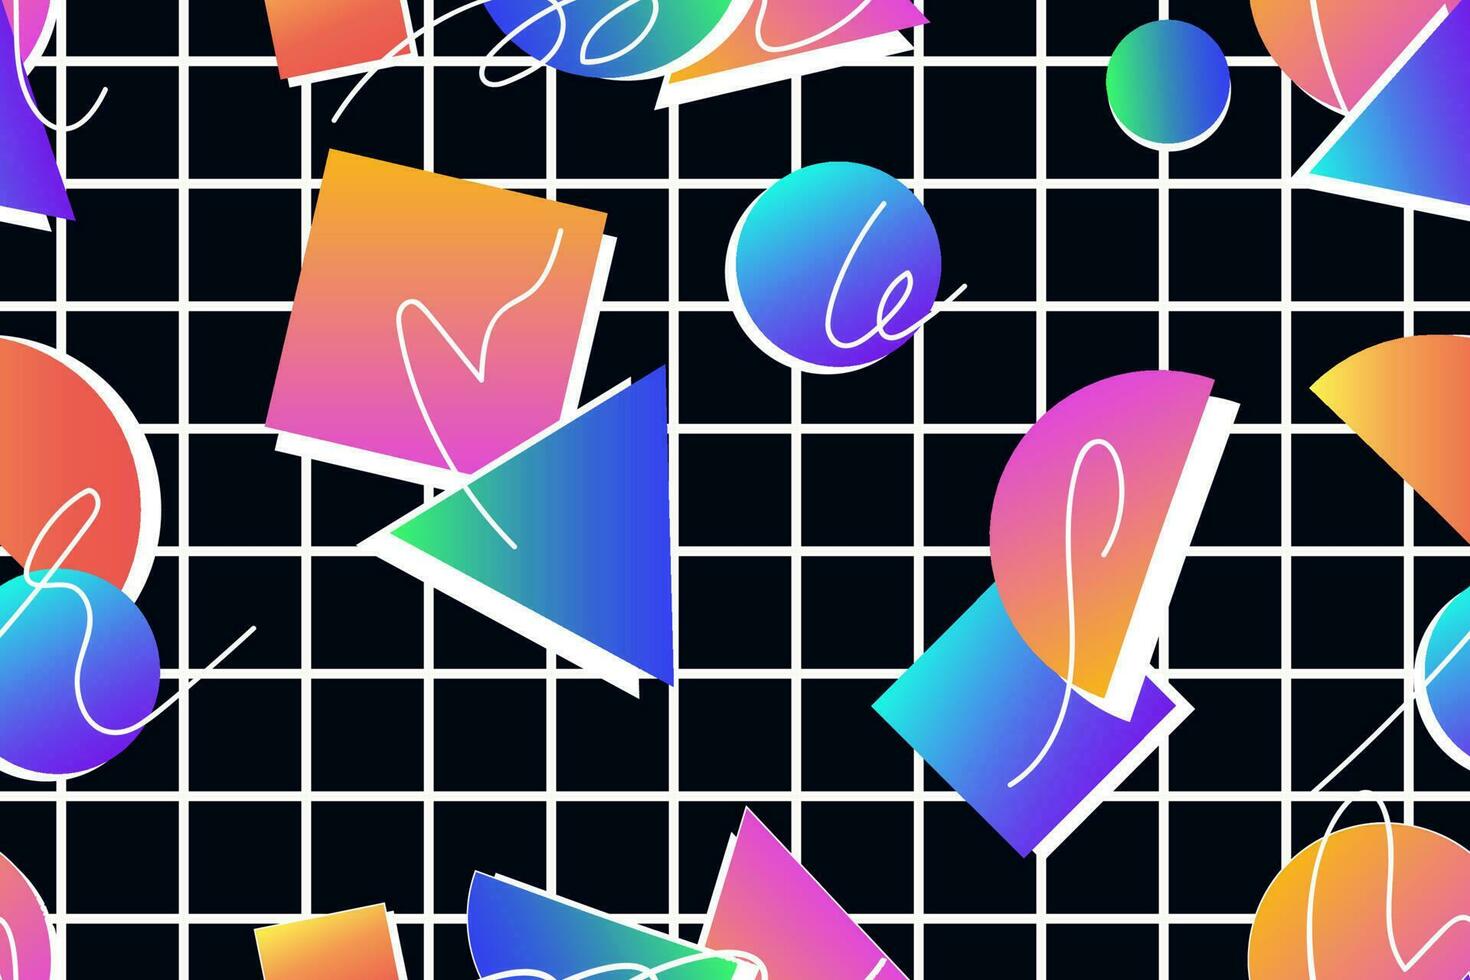 Retro 80's - 90's memphis seamless pattern with multicolored abstract geometric shapes. Vector illustration.